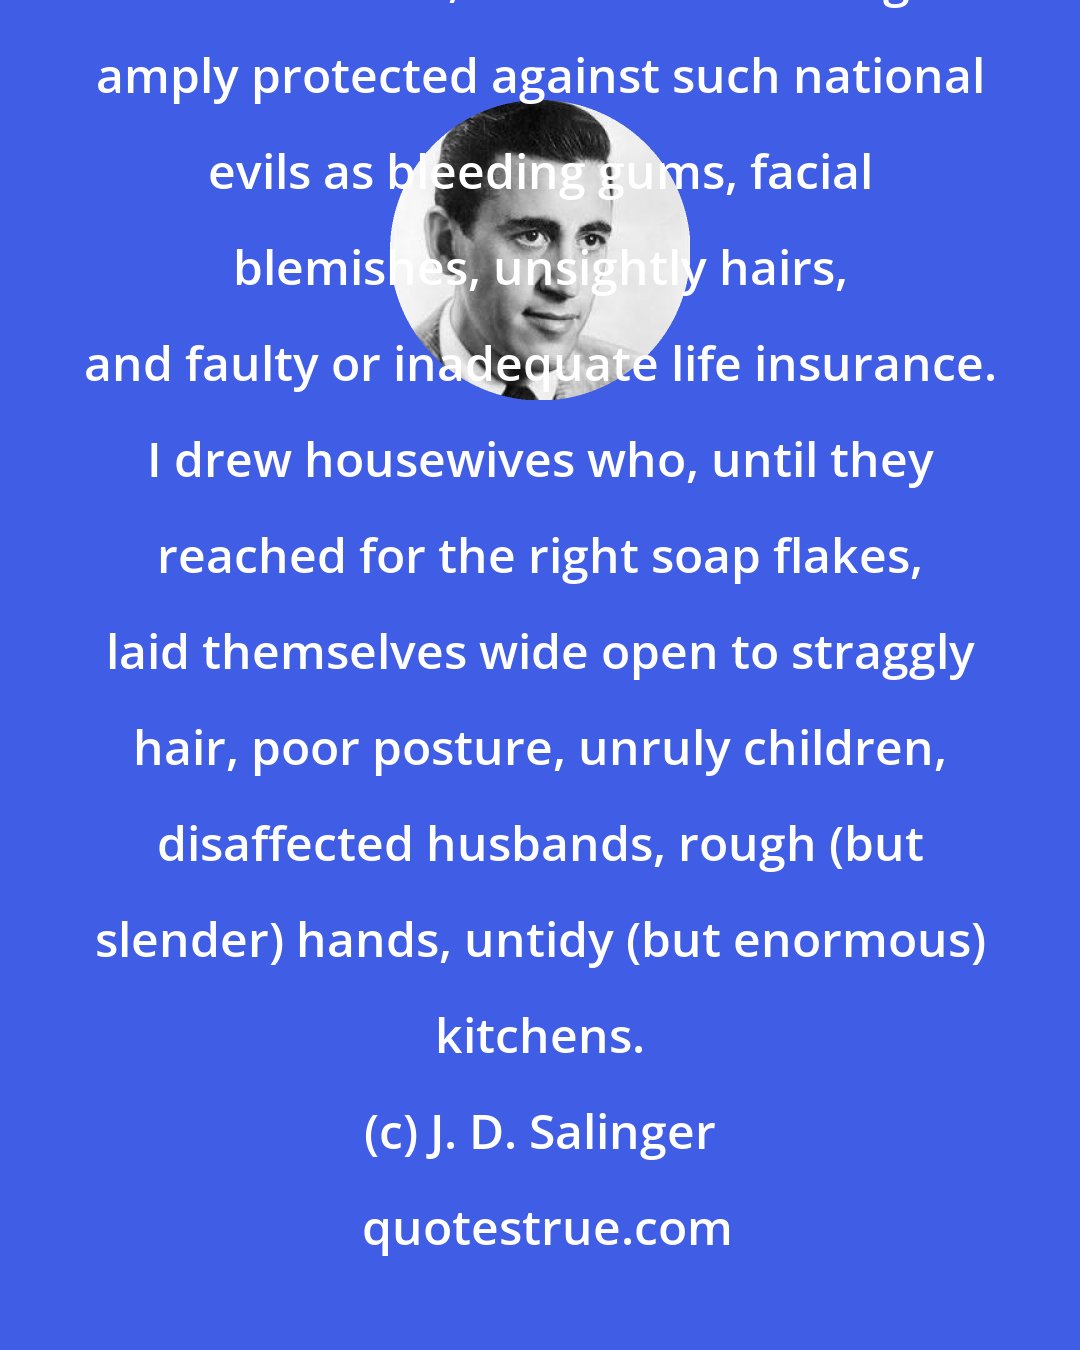 J. D. Salinger: I drew laughing, high-breasted girls aquaplaning without a care in the world, as a result of being amply protected against such national evils as bleeding gums, facial blemishes, unsightly hairs, and faulty or inadequate life insurance. I drew housewives who, until they reached for the right soap flakes, laid themselves wide open to straggly hair, poor posture, unruly children, disaffected husbands, rough (but slender) hands, untidy (but enormous) kitchens.